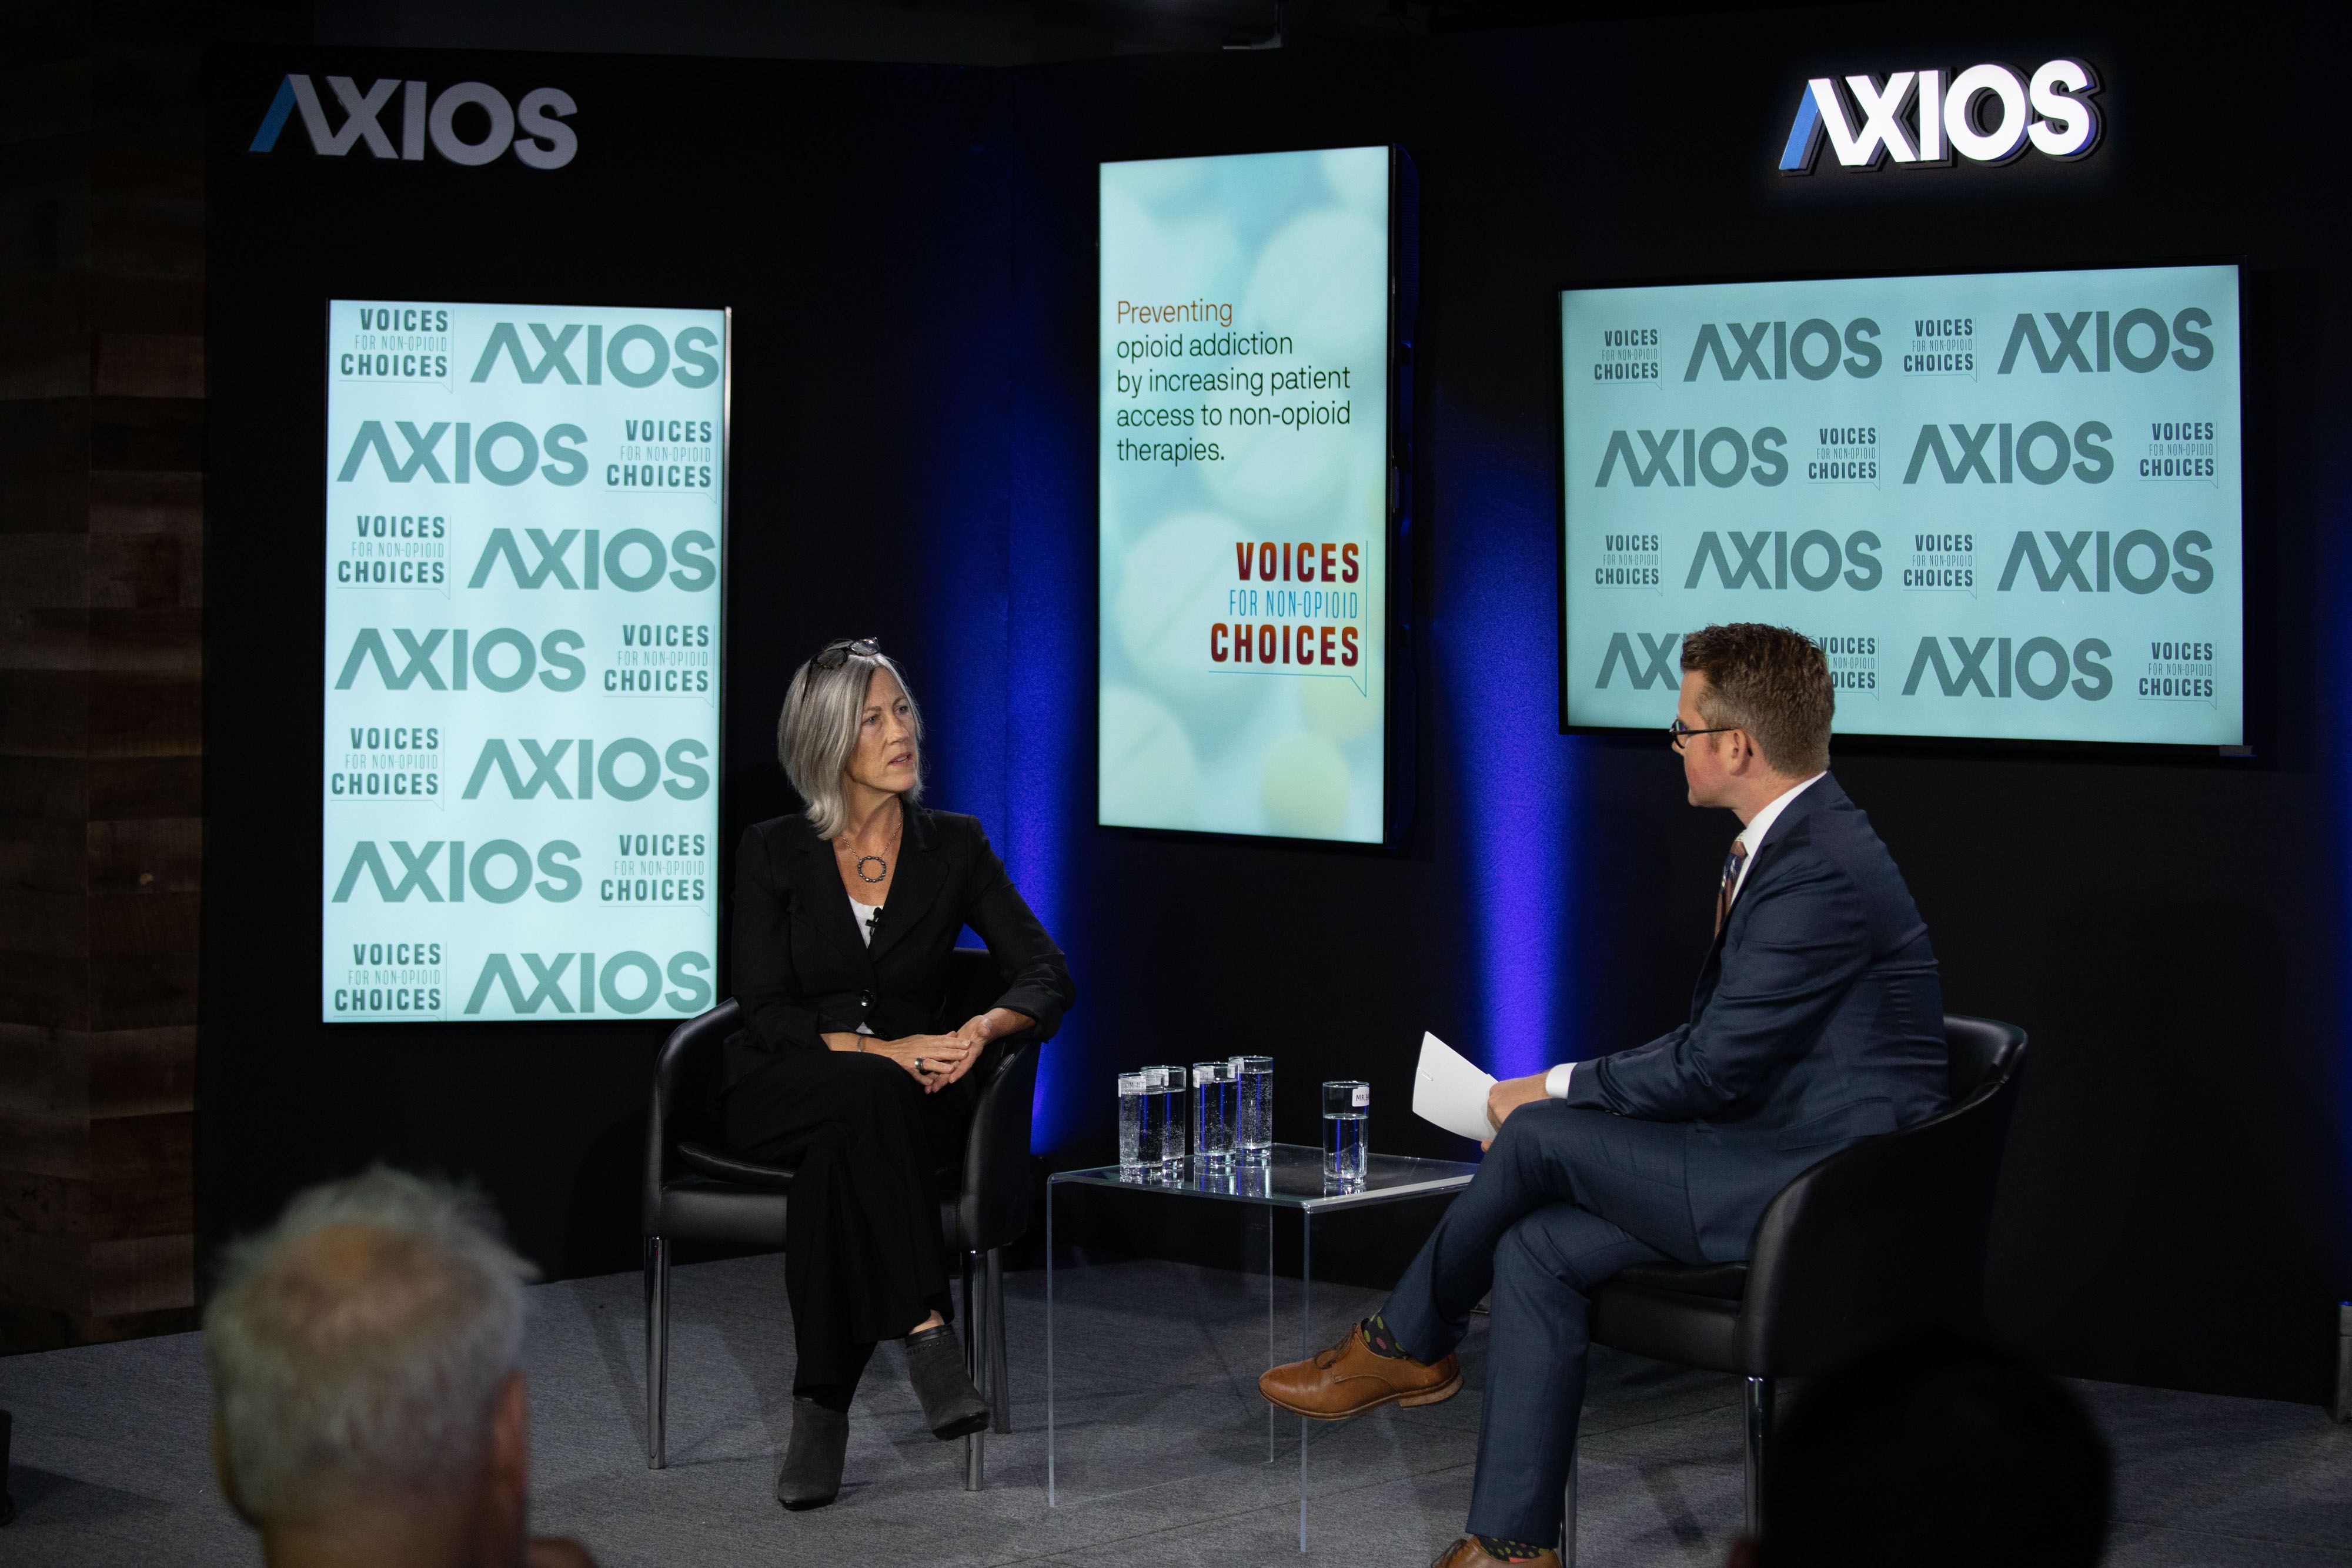 Dr. Marian Sherman discussing her work as an anesthesiologist on the Axios stage. 